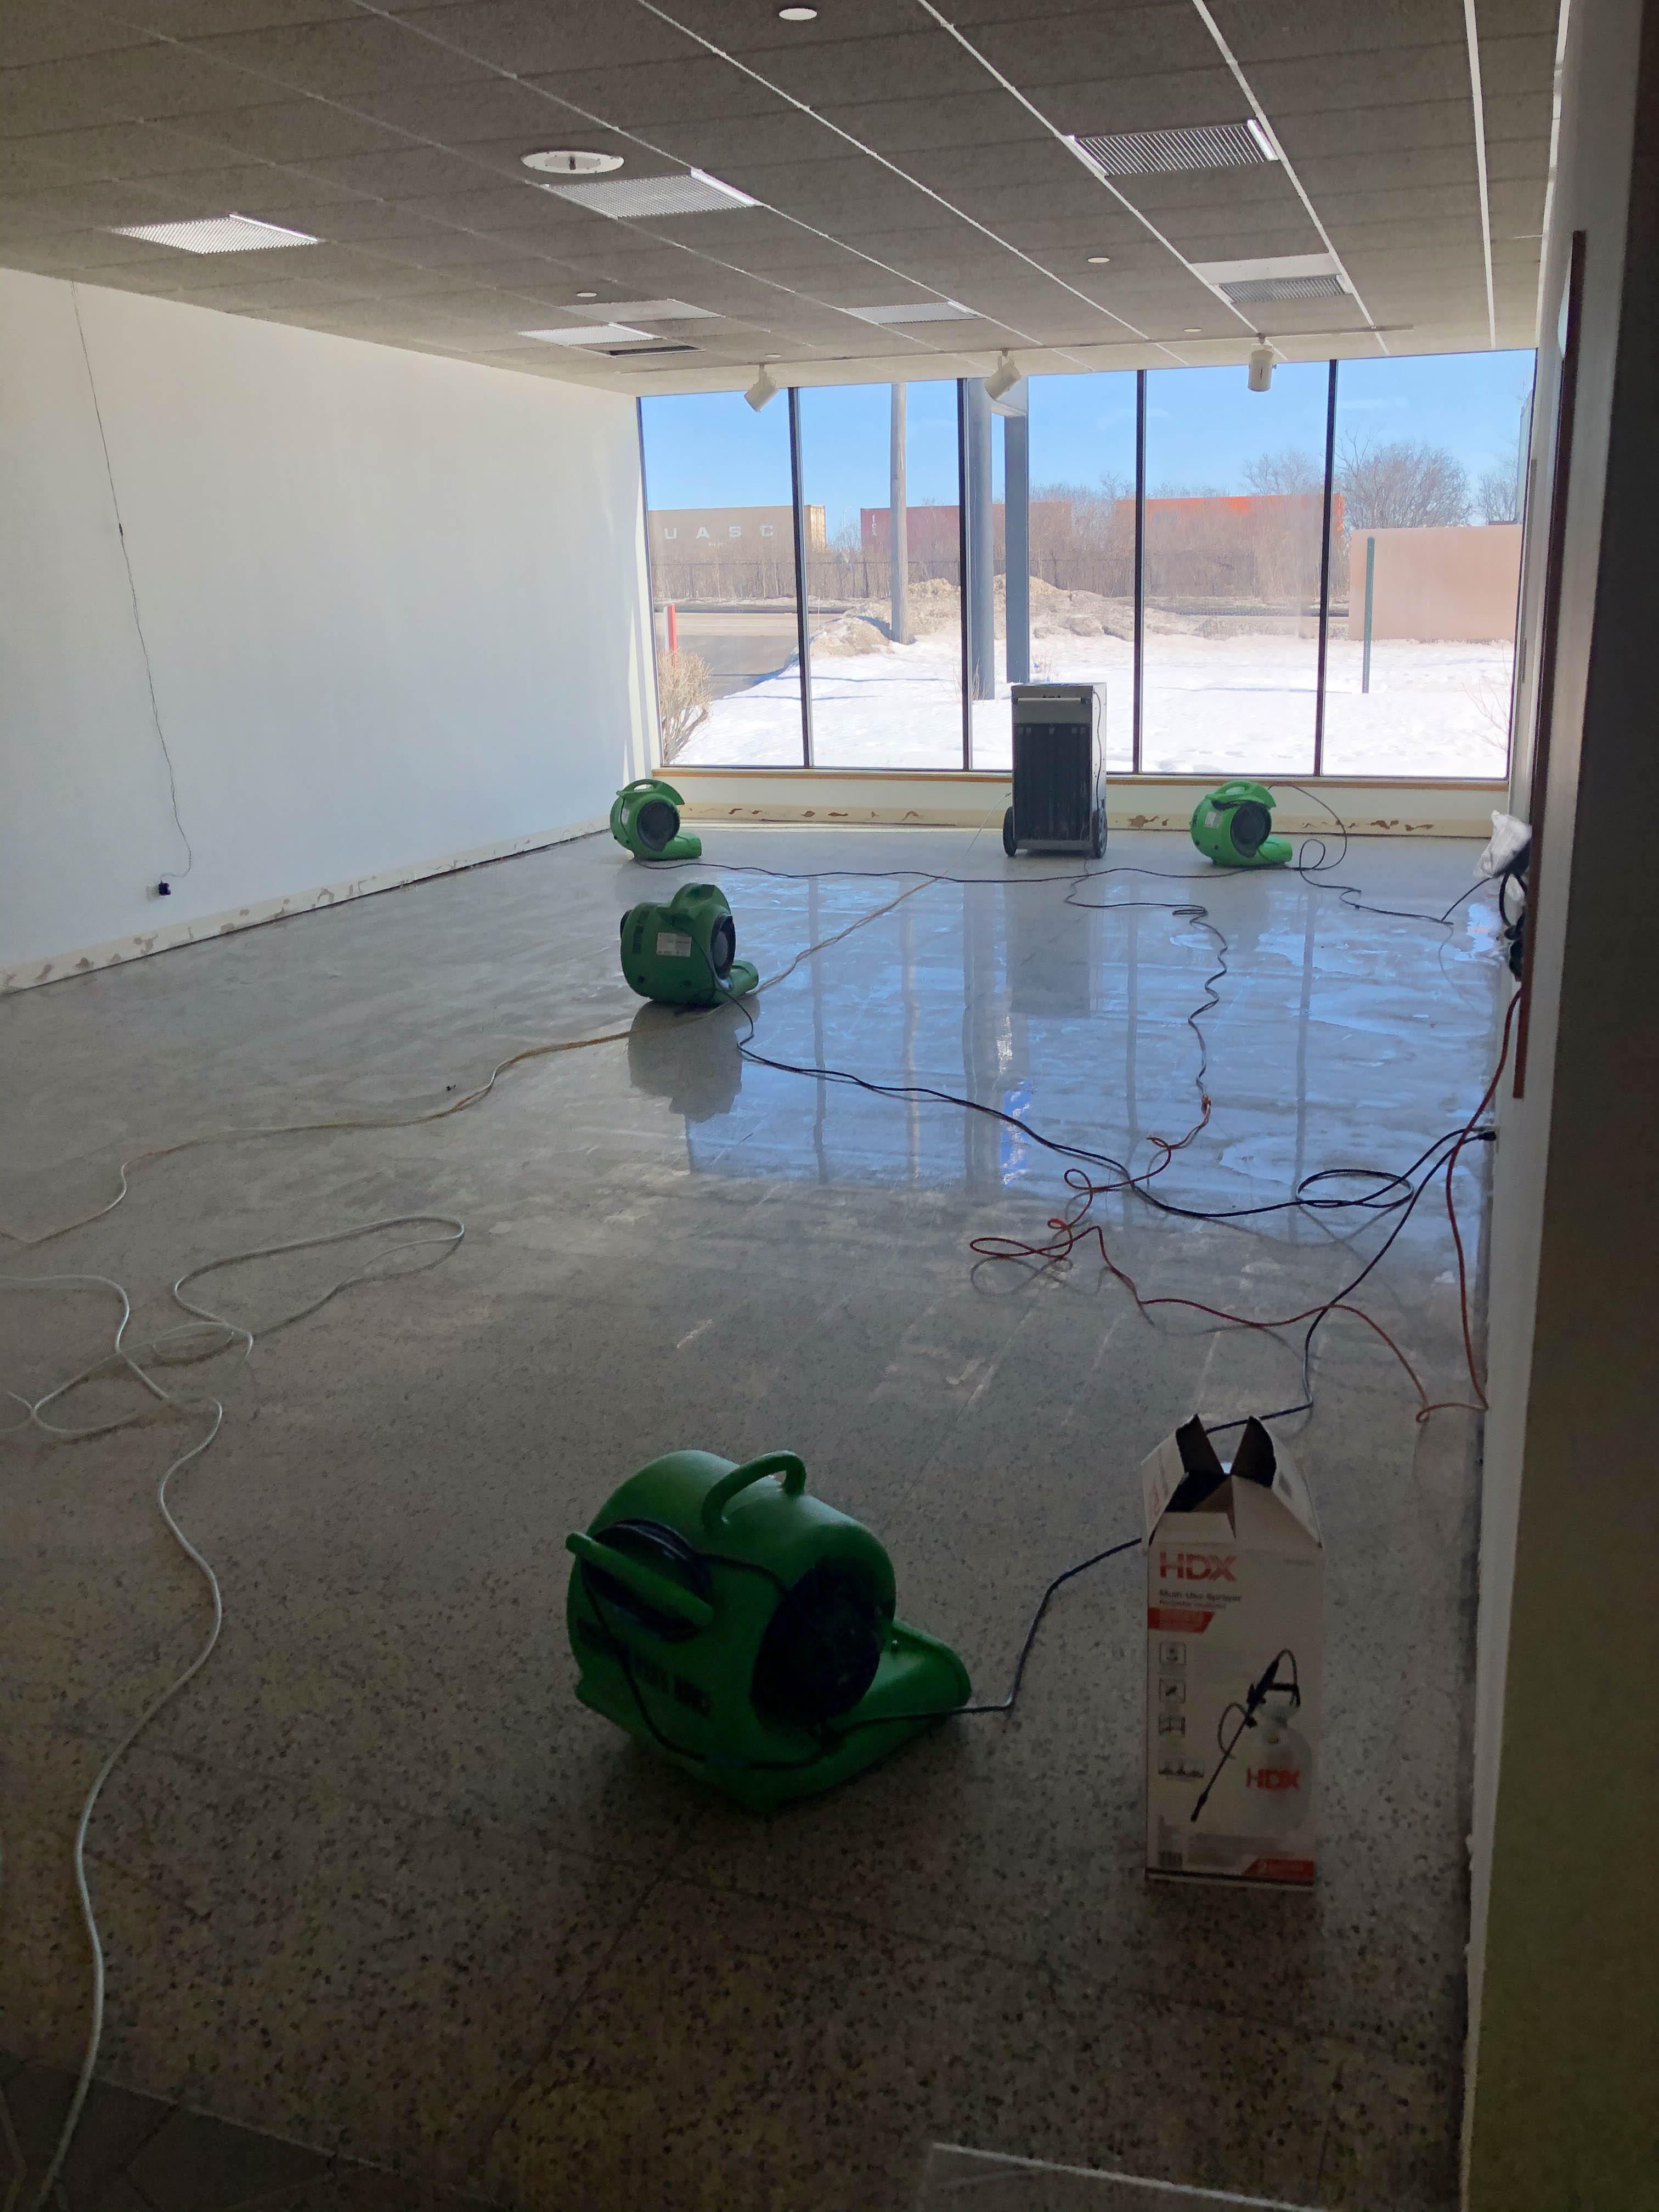 SERVPRO Park Ridge, North Rosemont and South Des Plaines  is the best choice when it comes to choosing a commercial restoration company. They are quicker to any disaster and can handle any size loss in the local area. Give us a call!